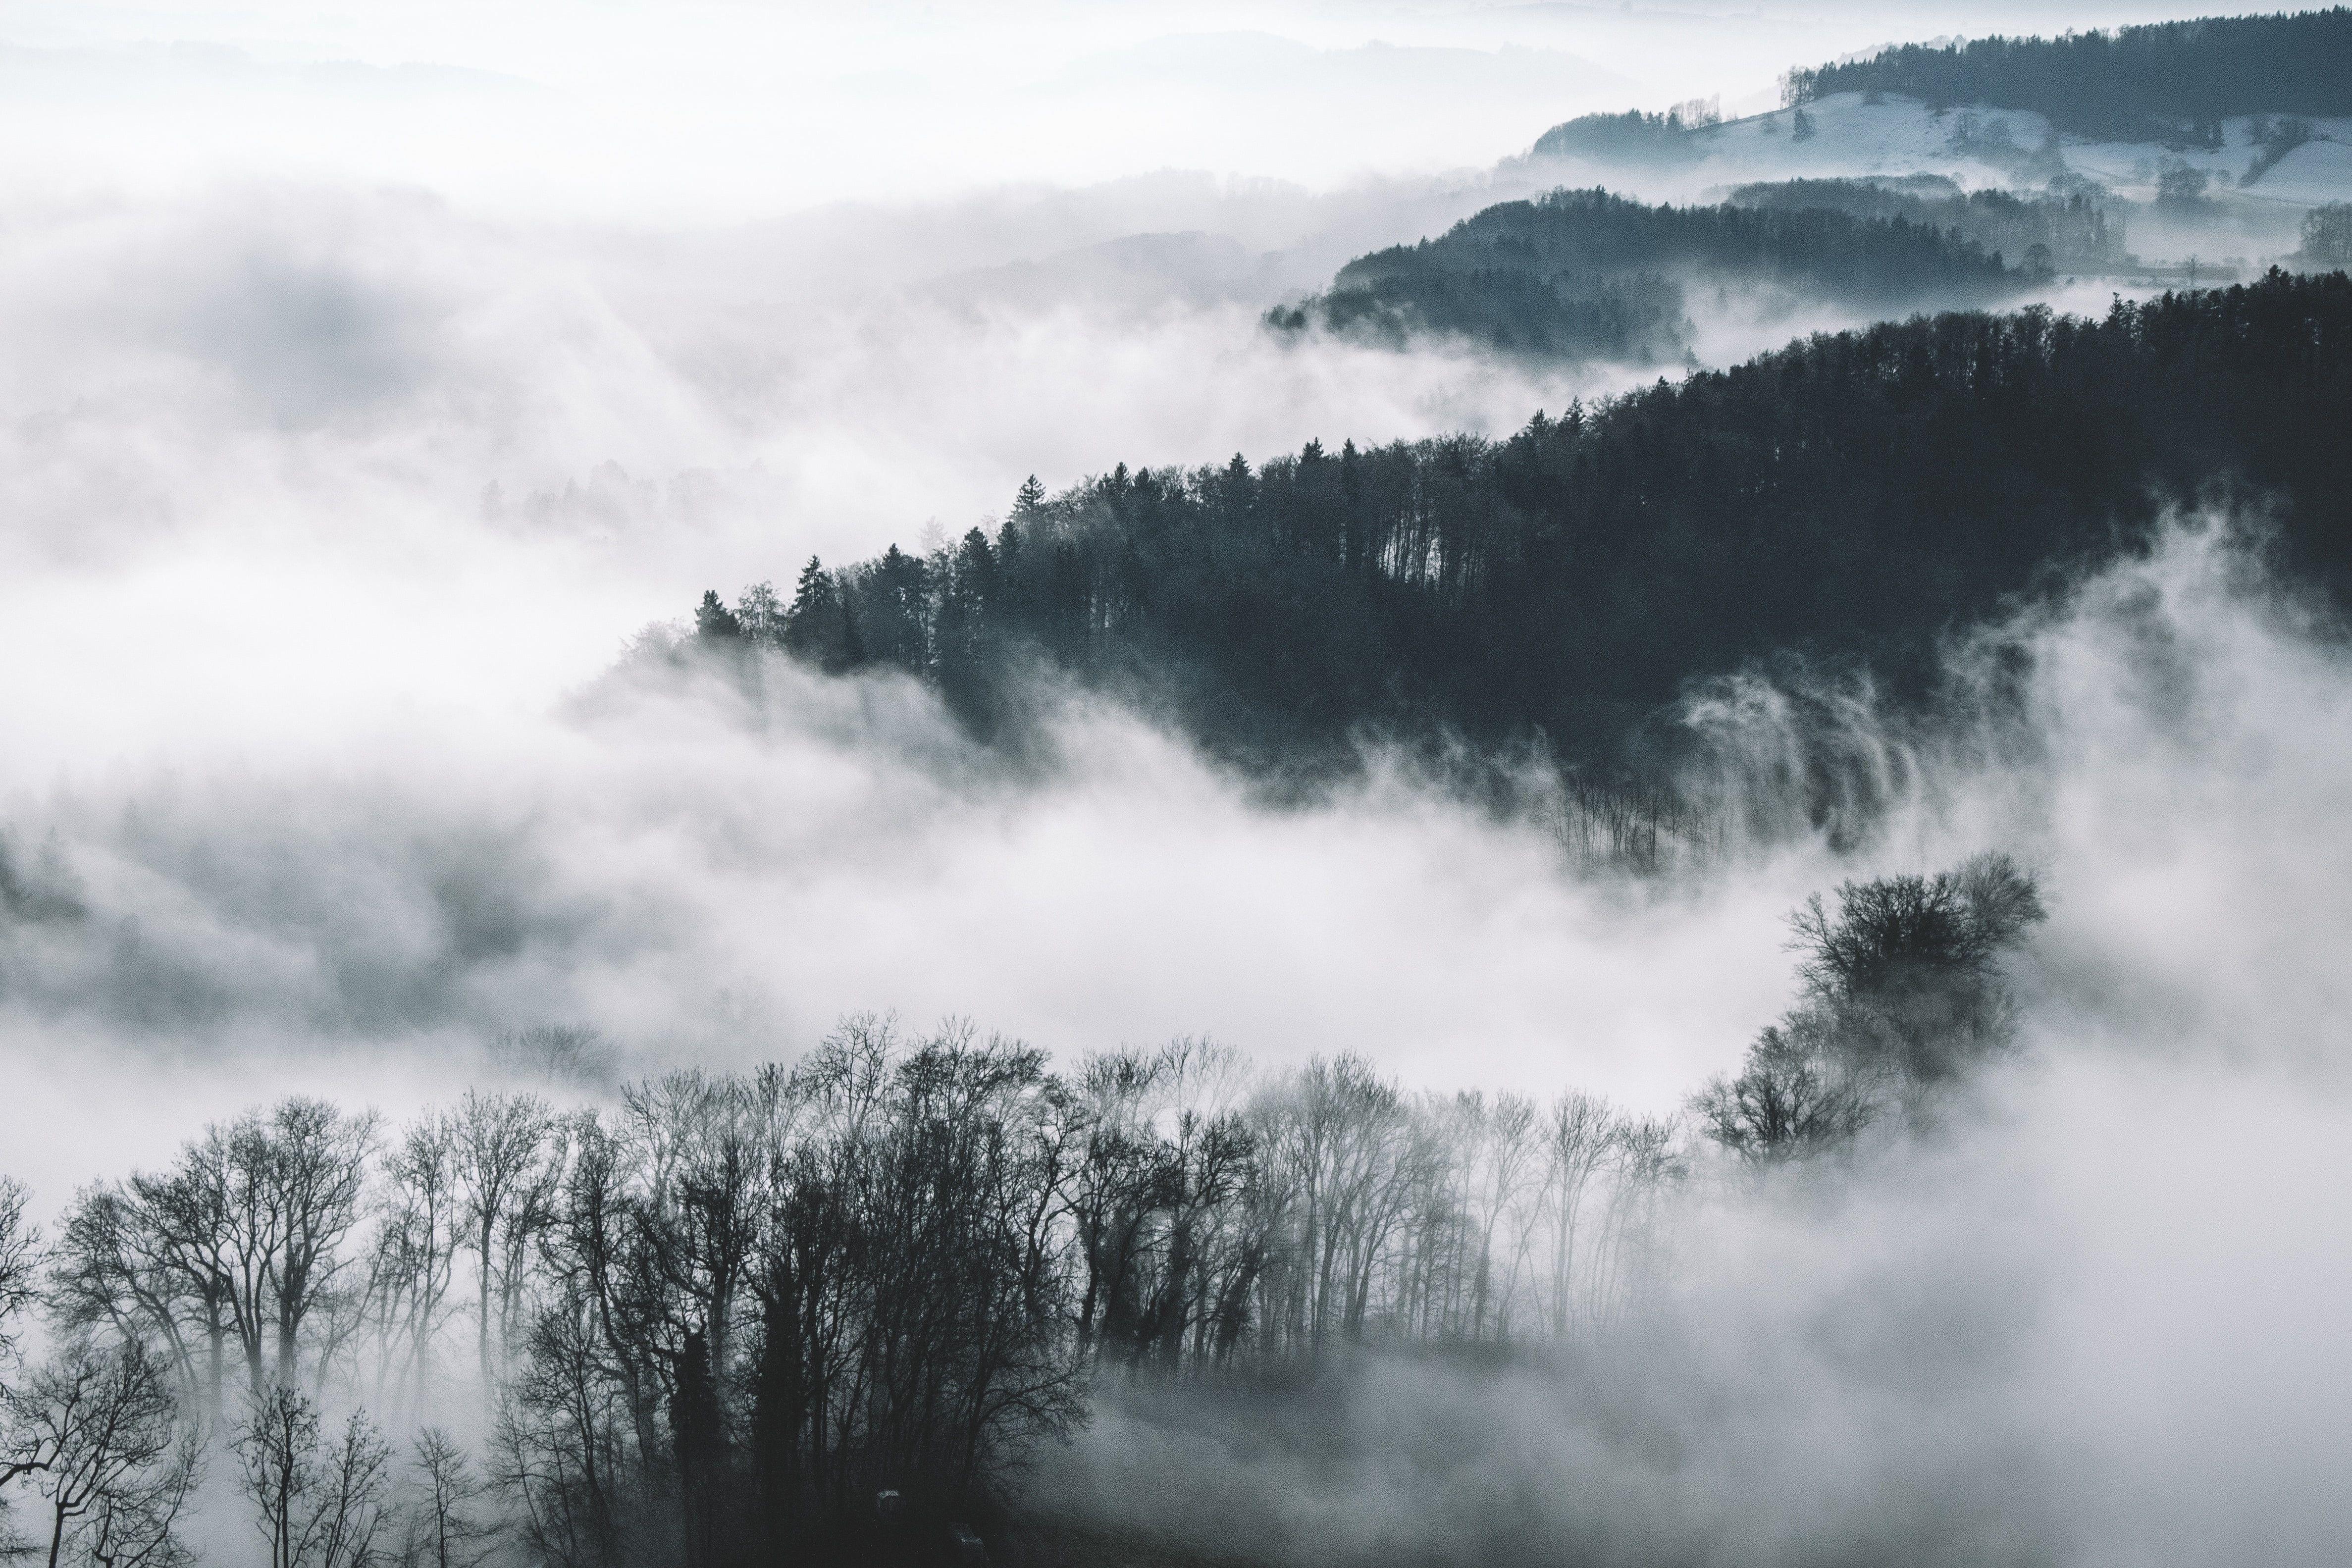 Foggy Mountain Forest Wallpapers - Top Free Foggy Mountain Forest